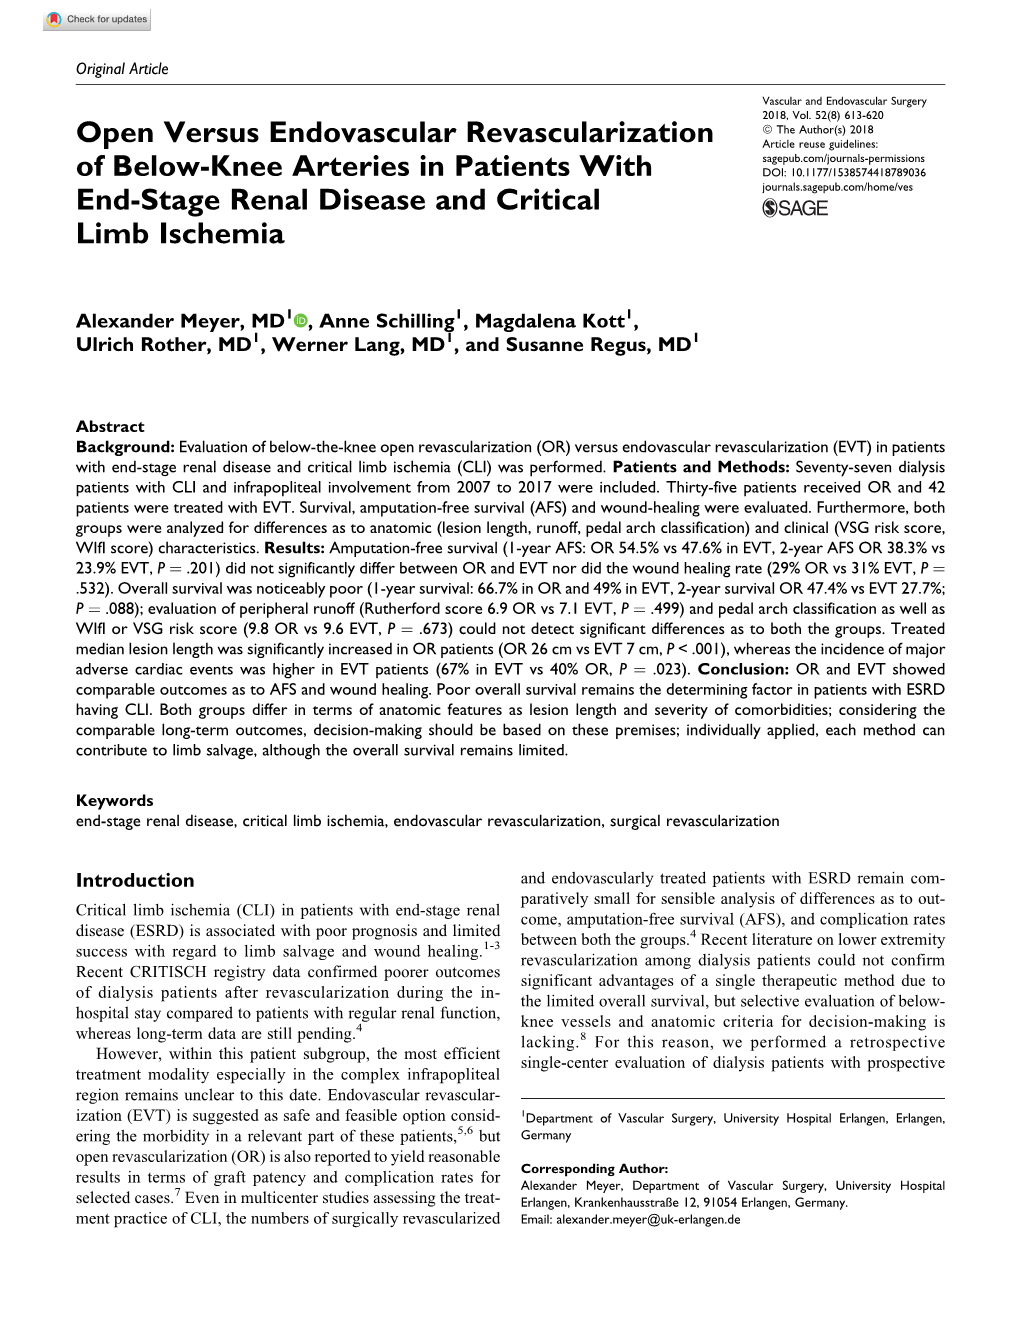 Open Versus Endovascular Revascularization of Below-Knee Arteries in Patients with End-Stage Renal Disease and Critical Limb